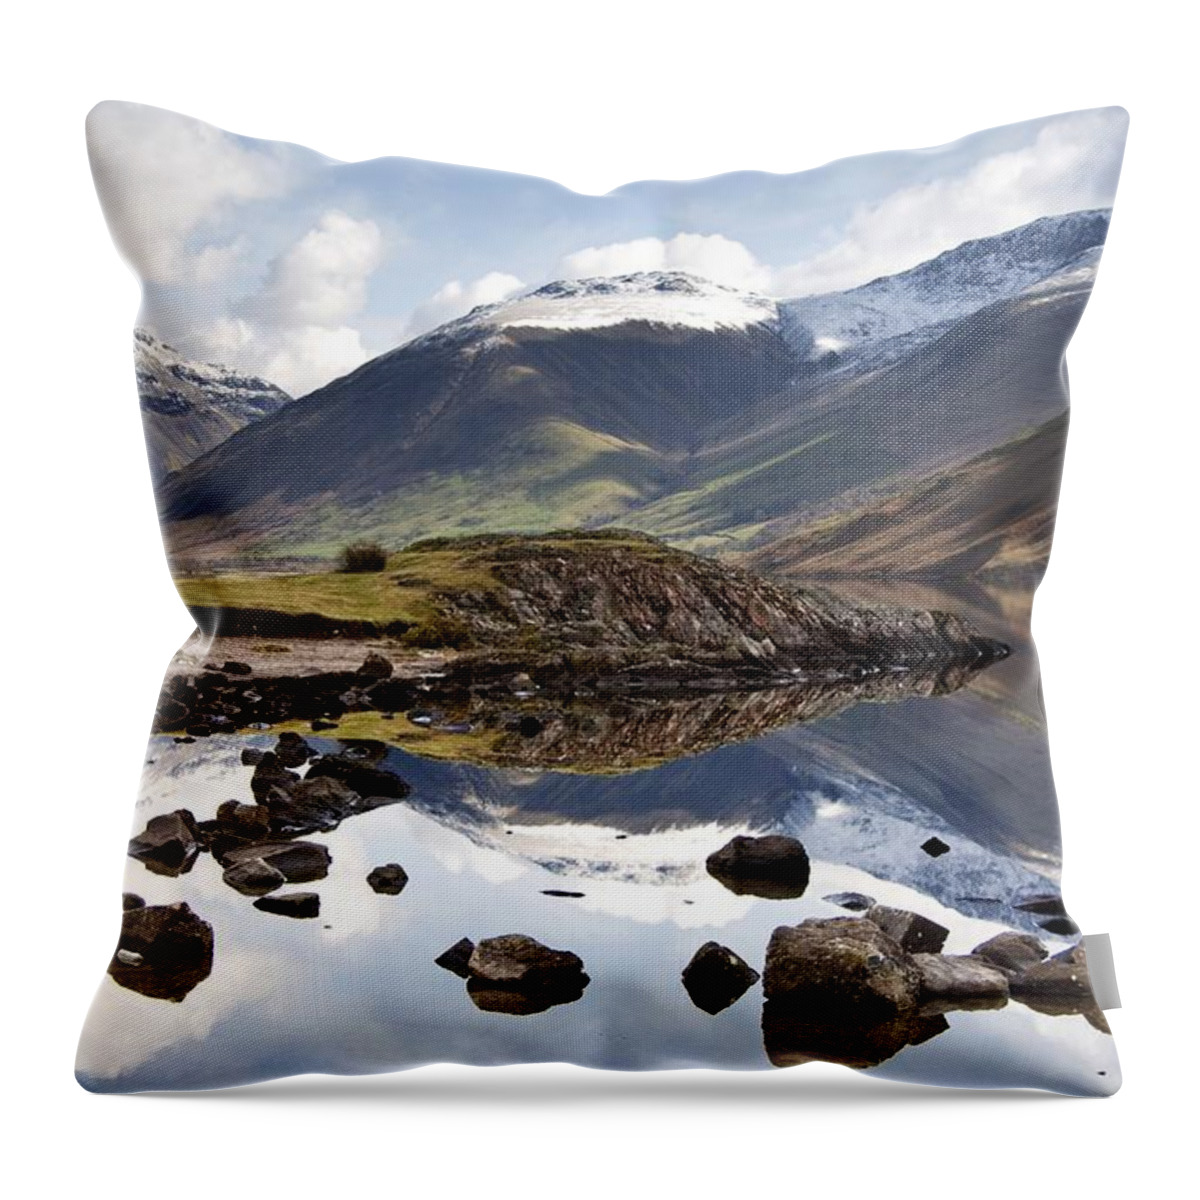 Cumbria Throw Pillow featuring the photograph Mountains And Lake At Lake District by John Short